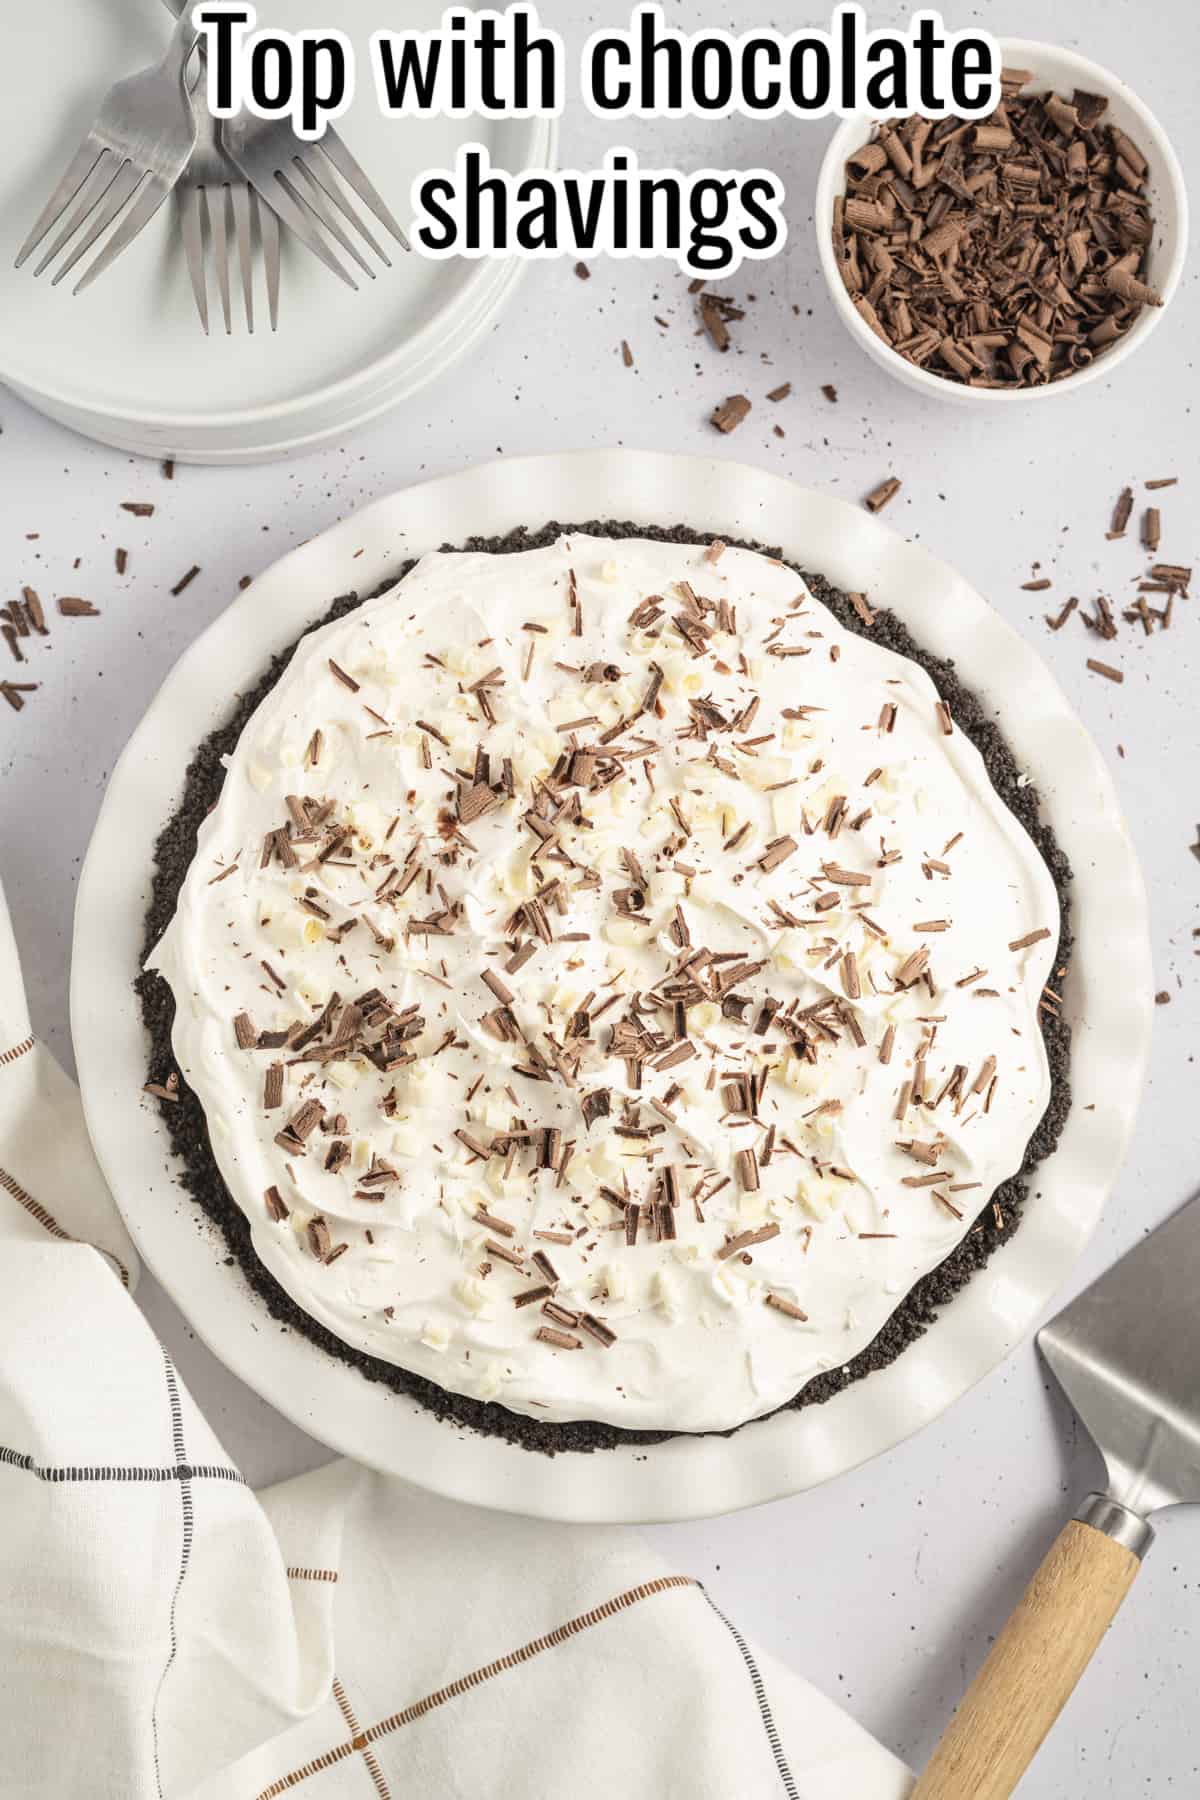 chocolate pie with cool whip and chocolate shavings.